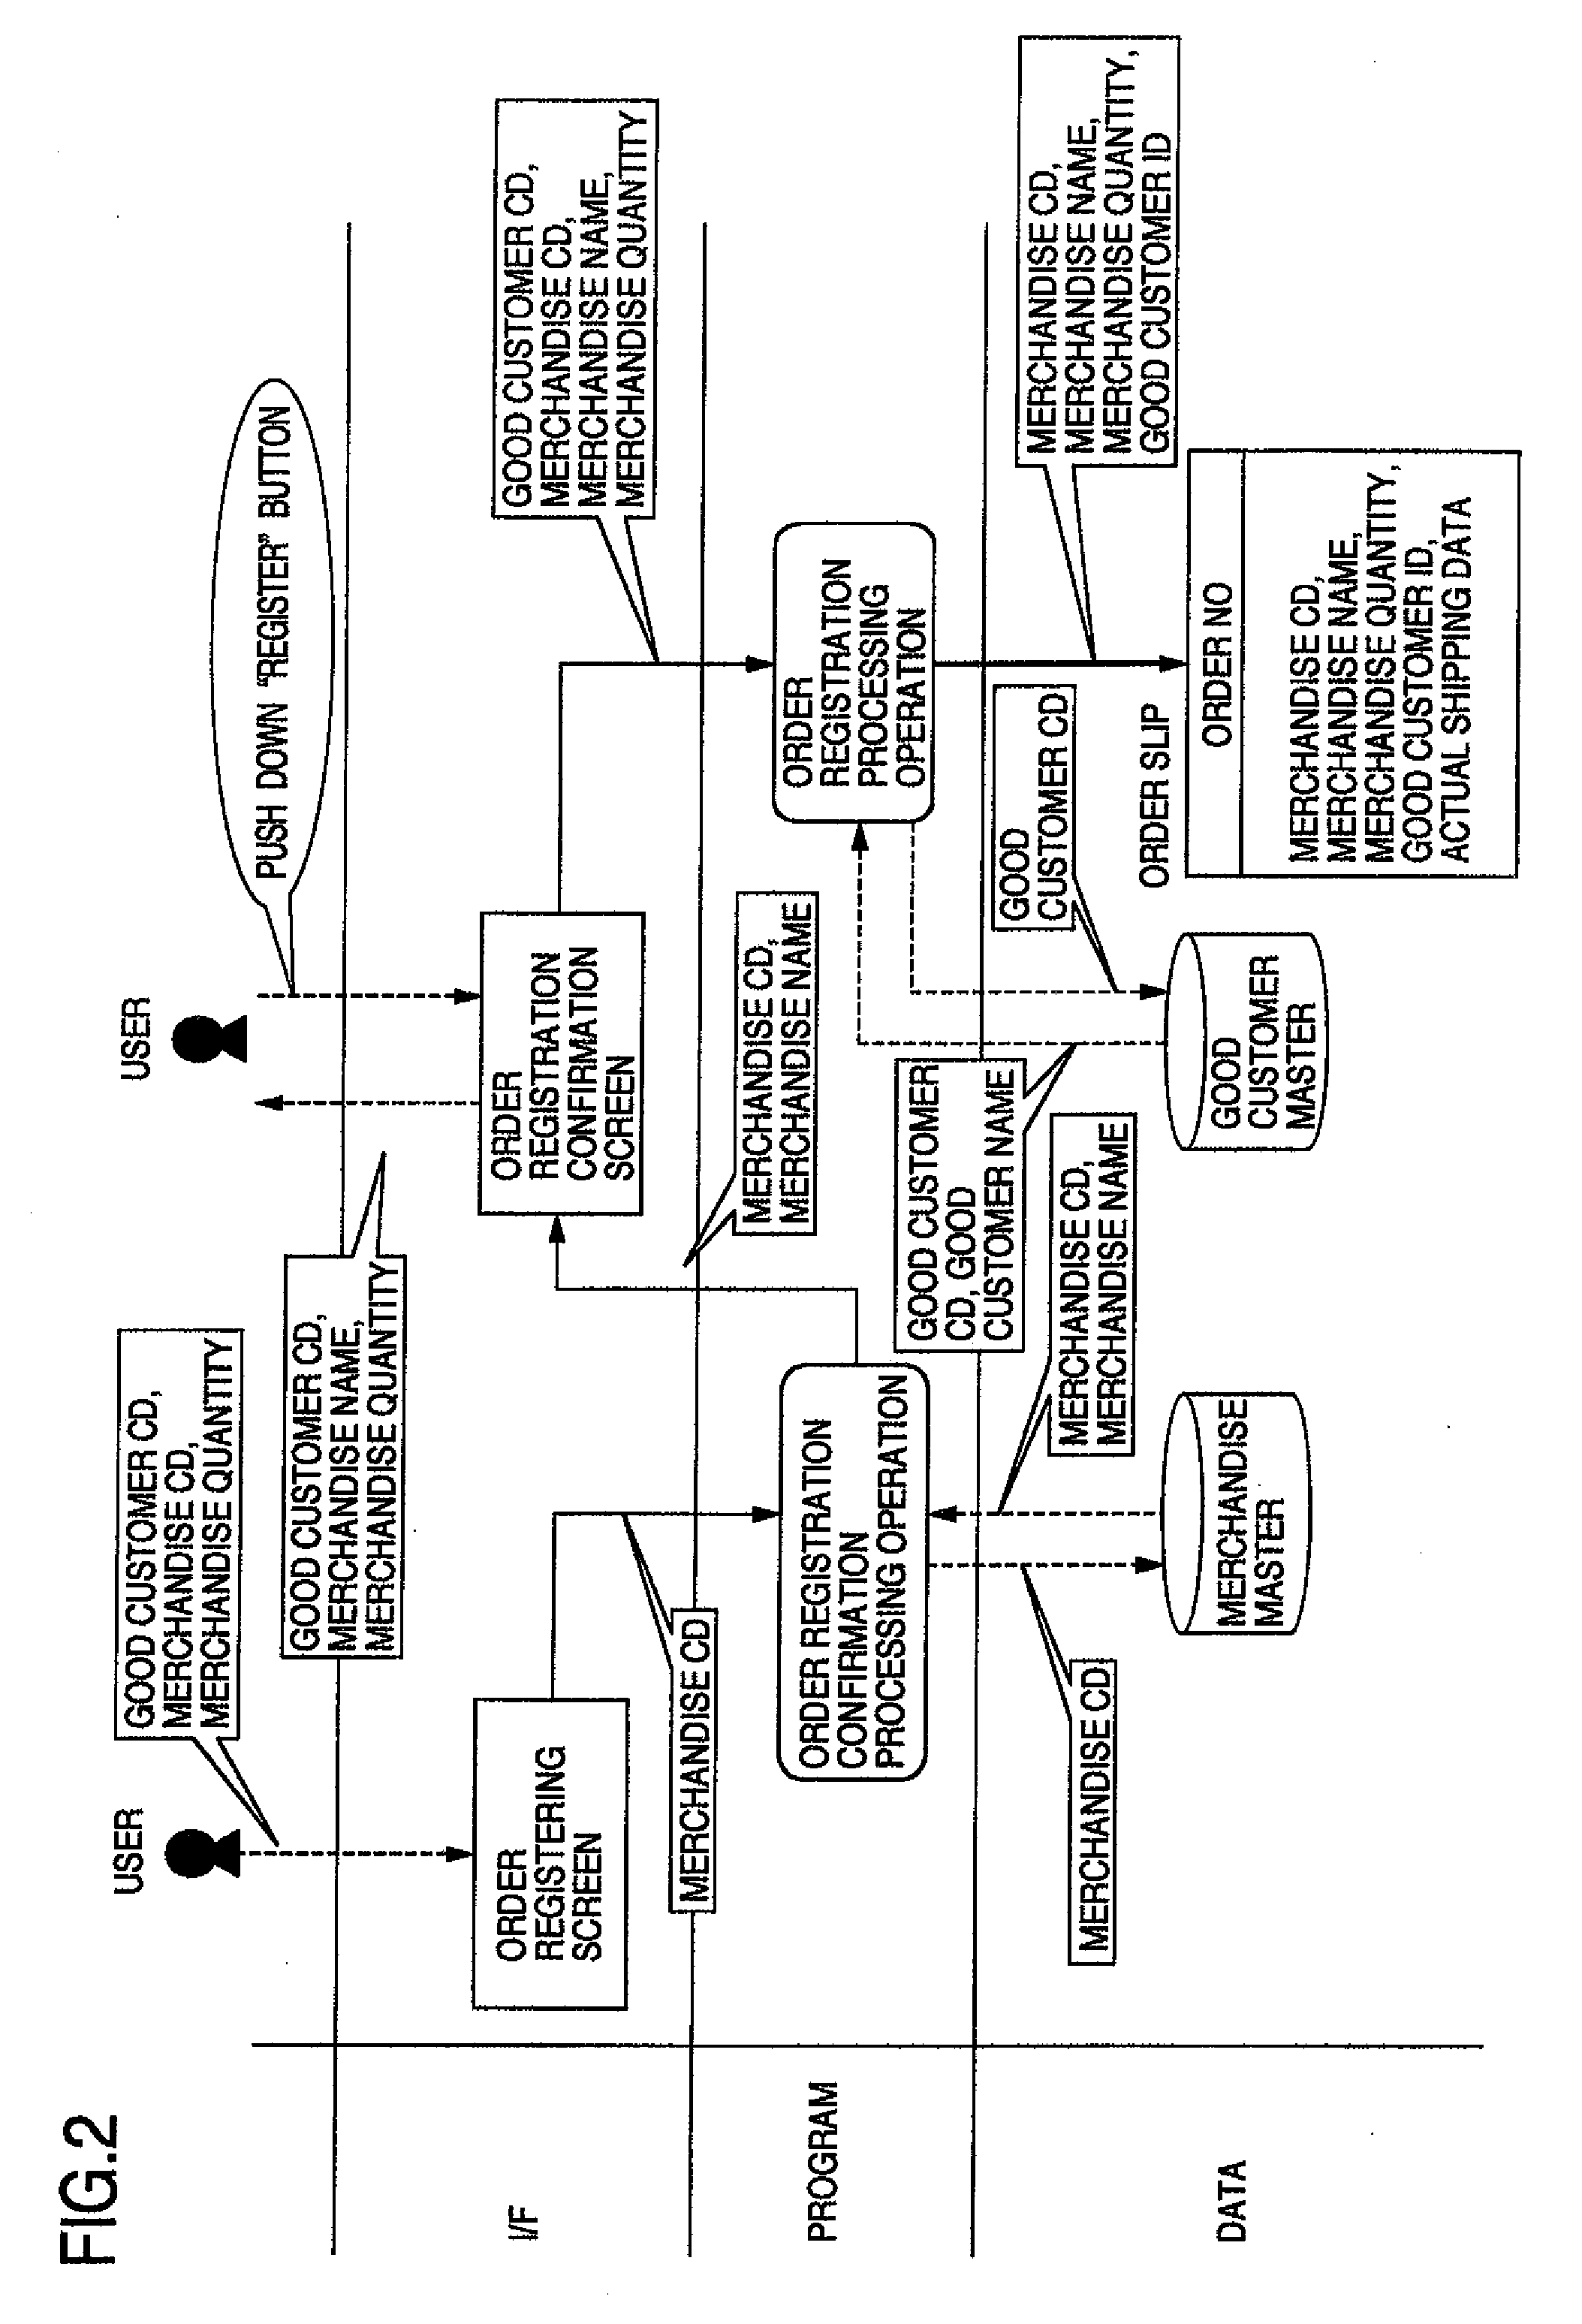 Business specification comprehension assistance system and method